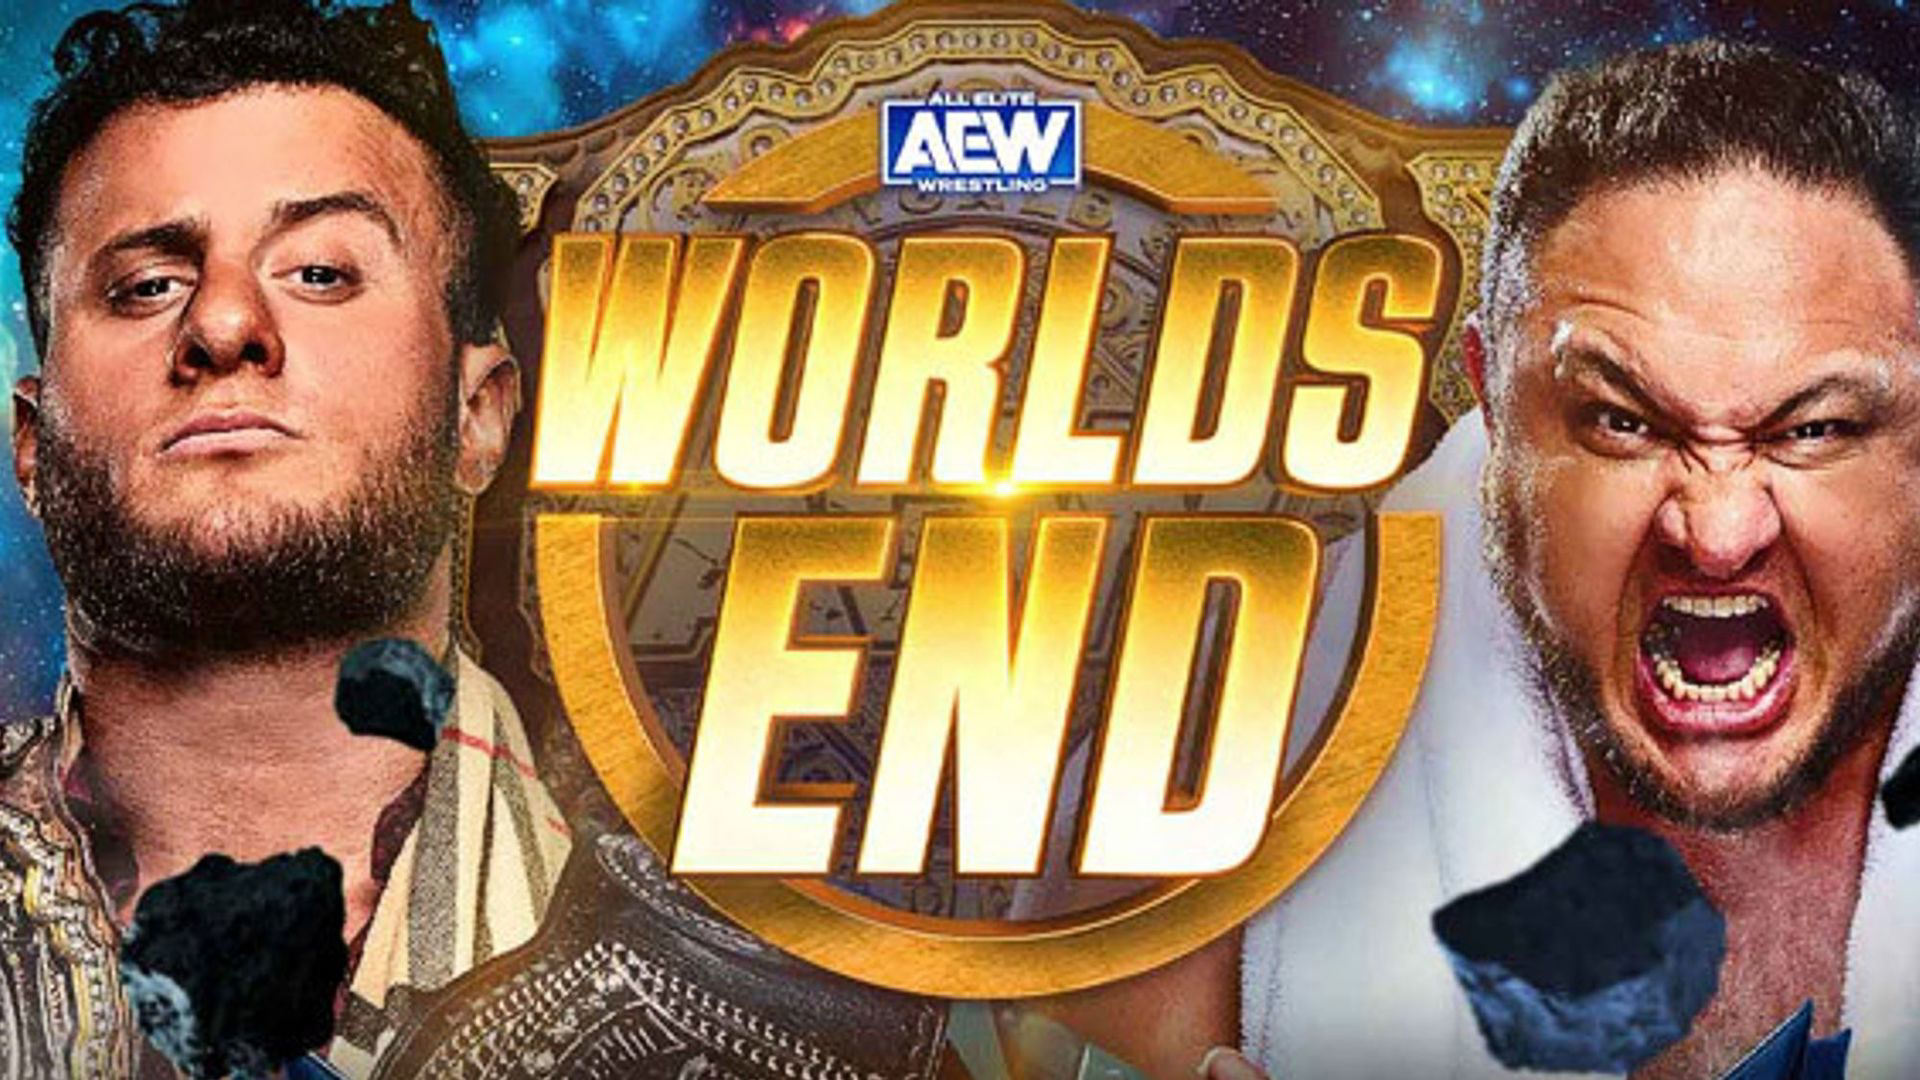 AEW Worlds End 2023 live stream Start time, card and how to watch online